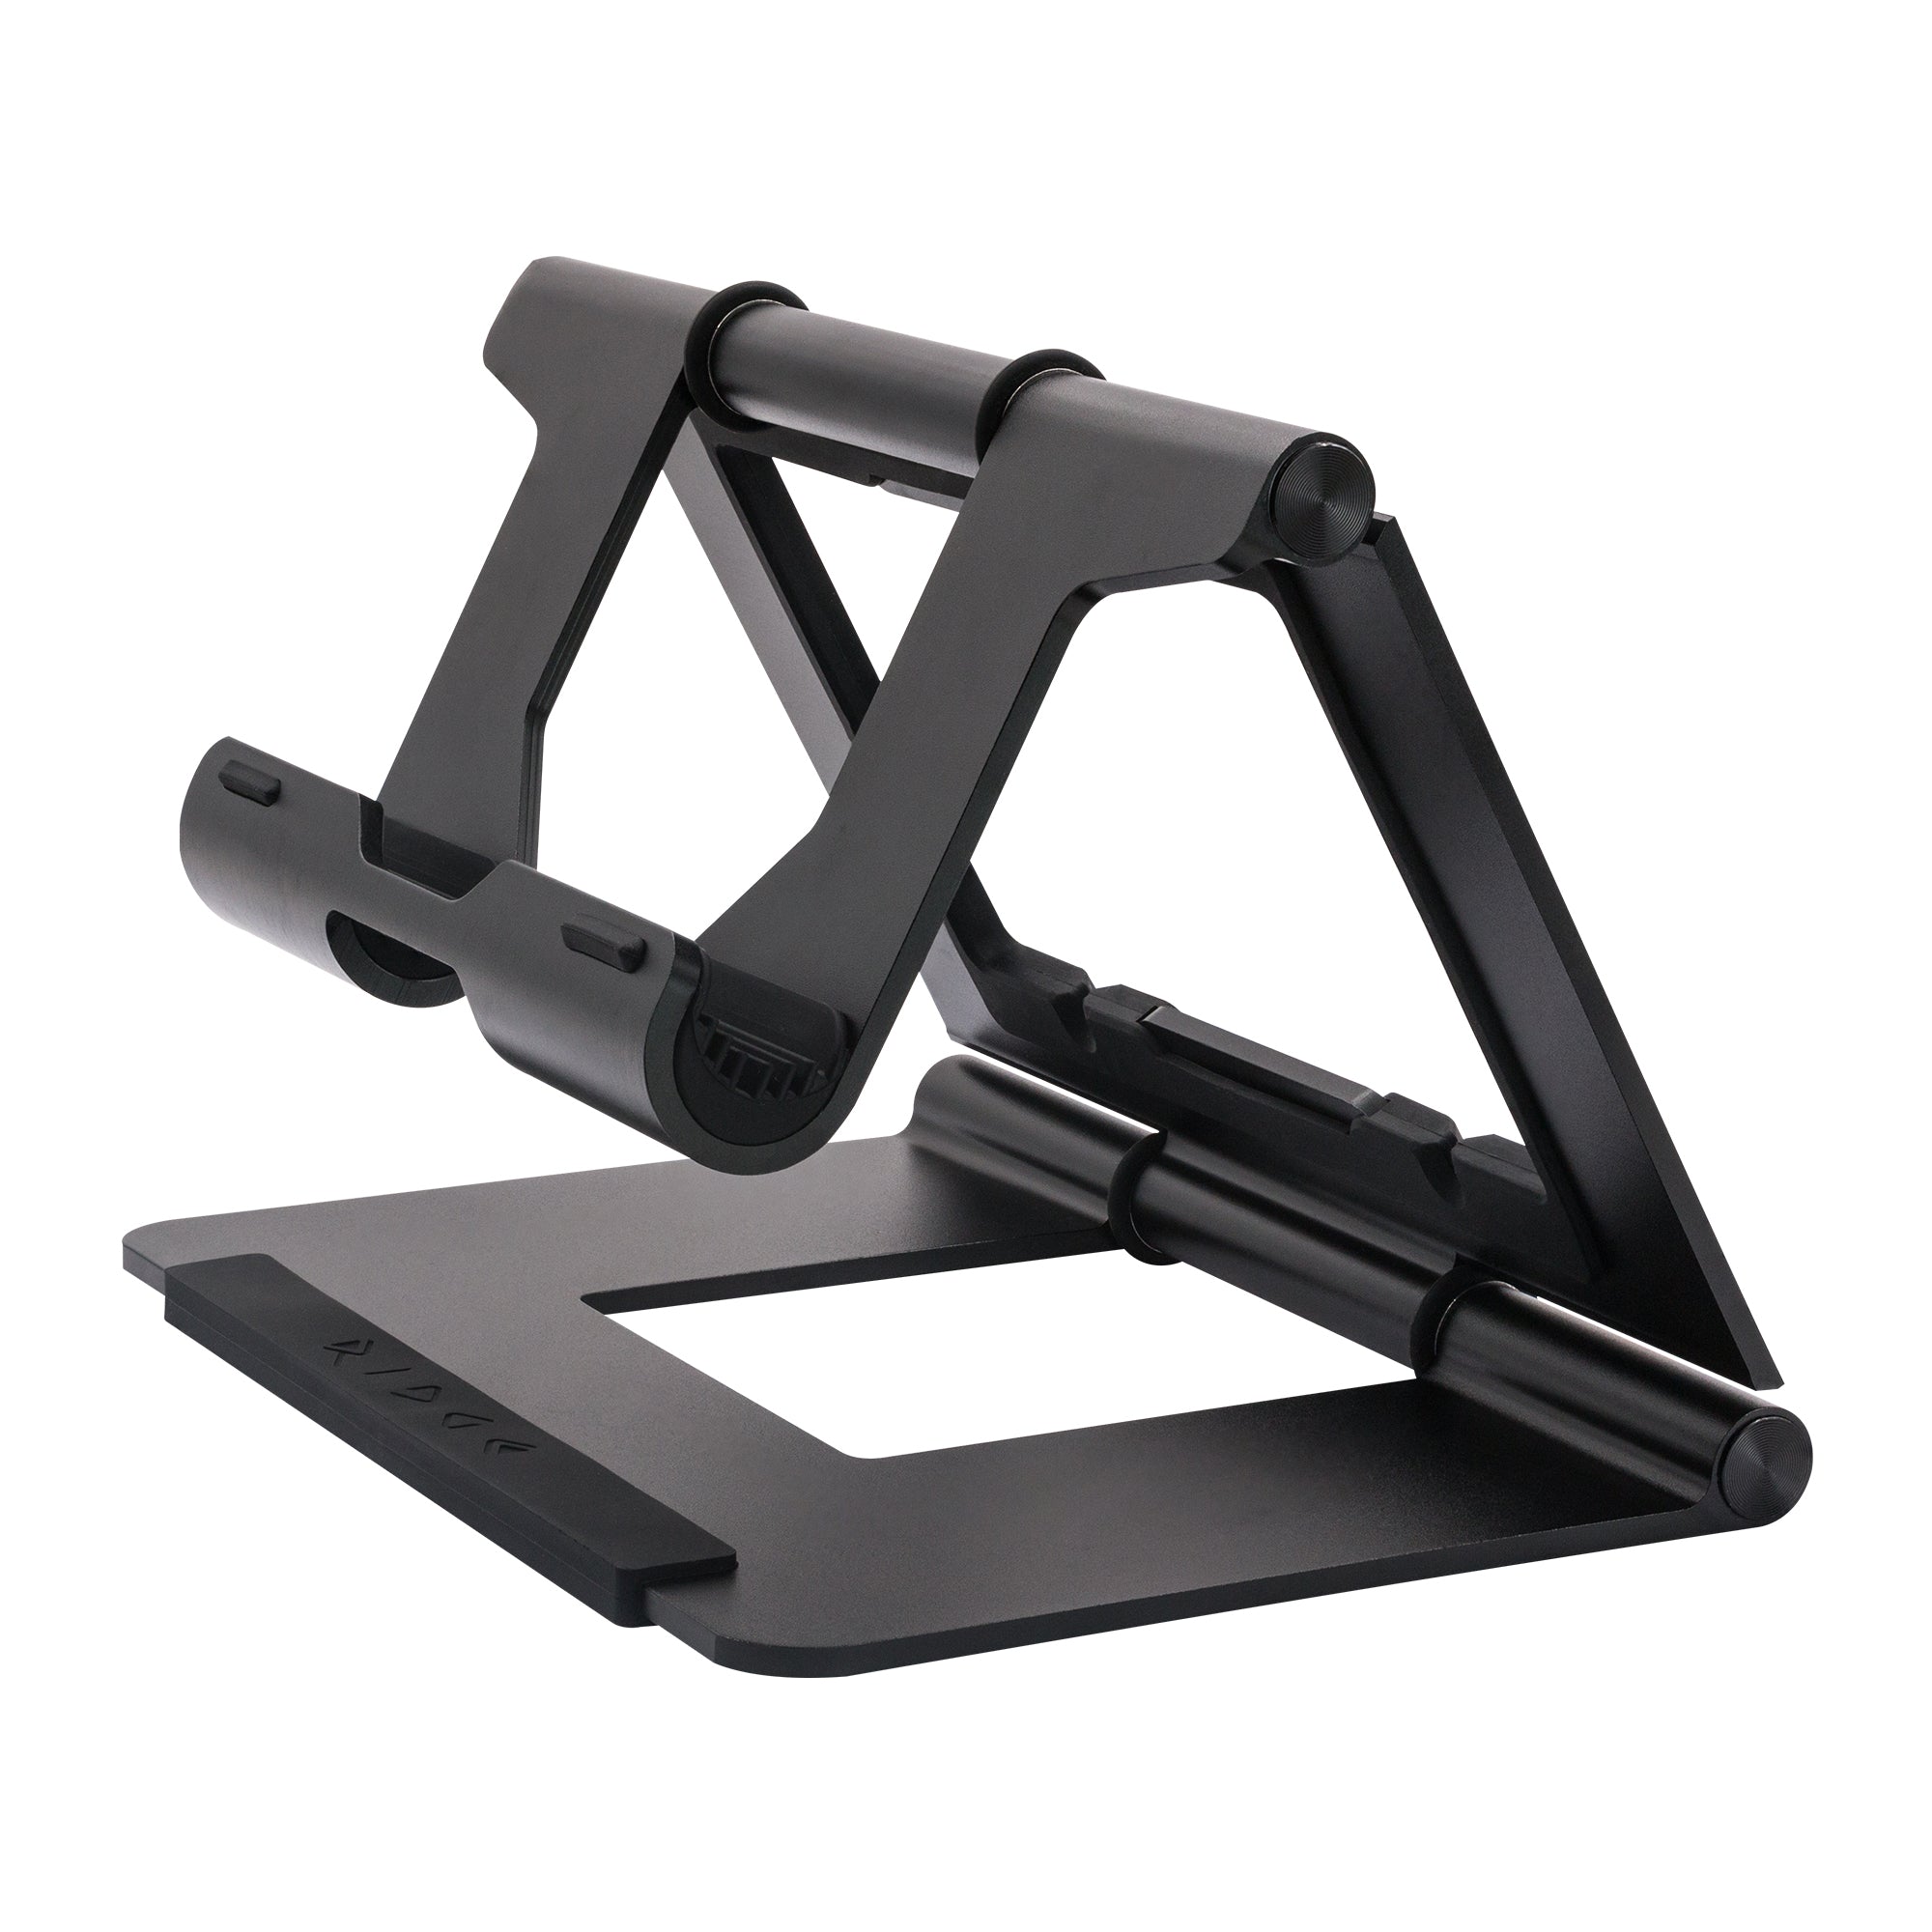 Rmour stand - Foldable Laptop and Tablet Stand